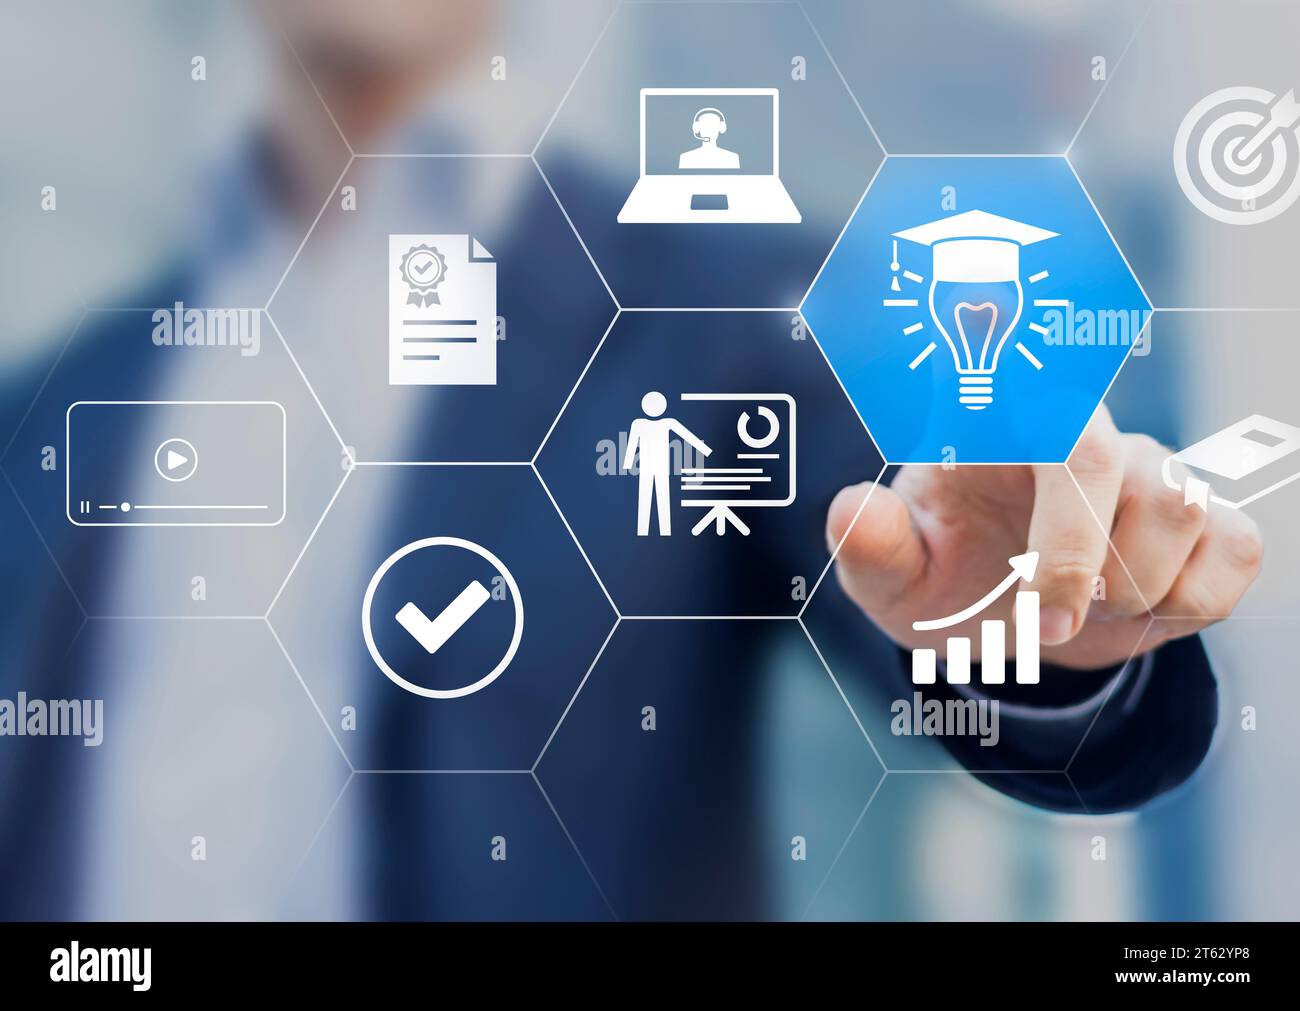 E-learning, webinar, online education and training to develop new skills and knowledge. AI-enhanced learning technology with personalized courses. Rem Stock Photo